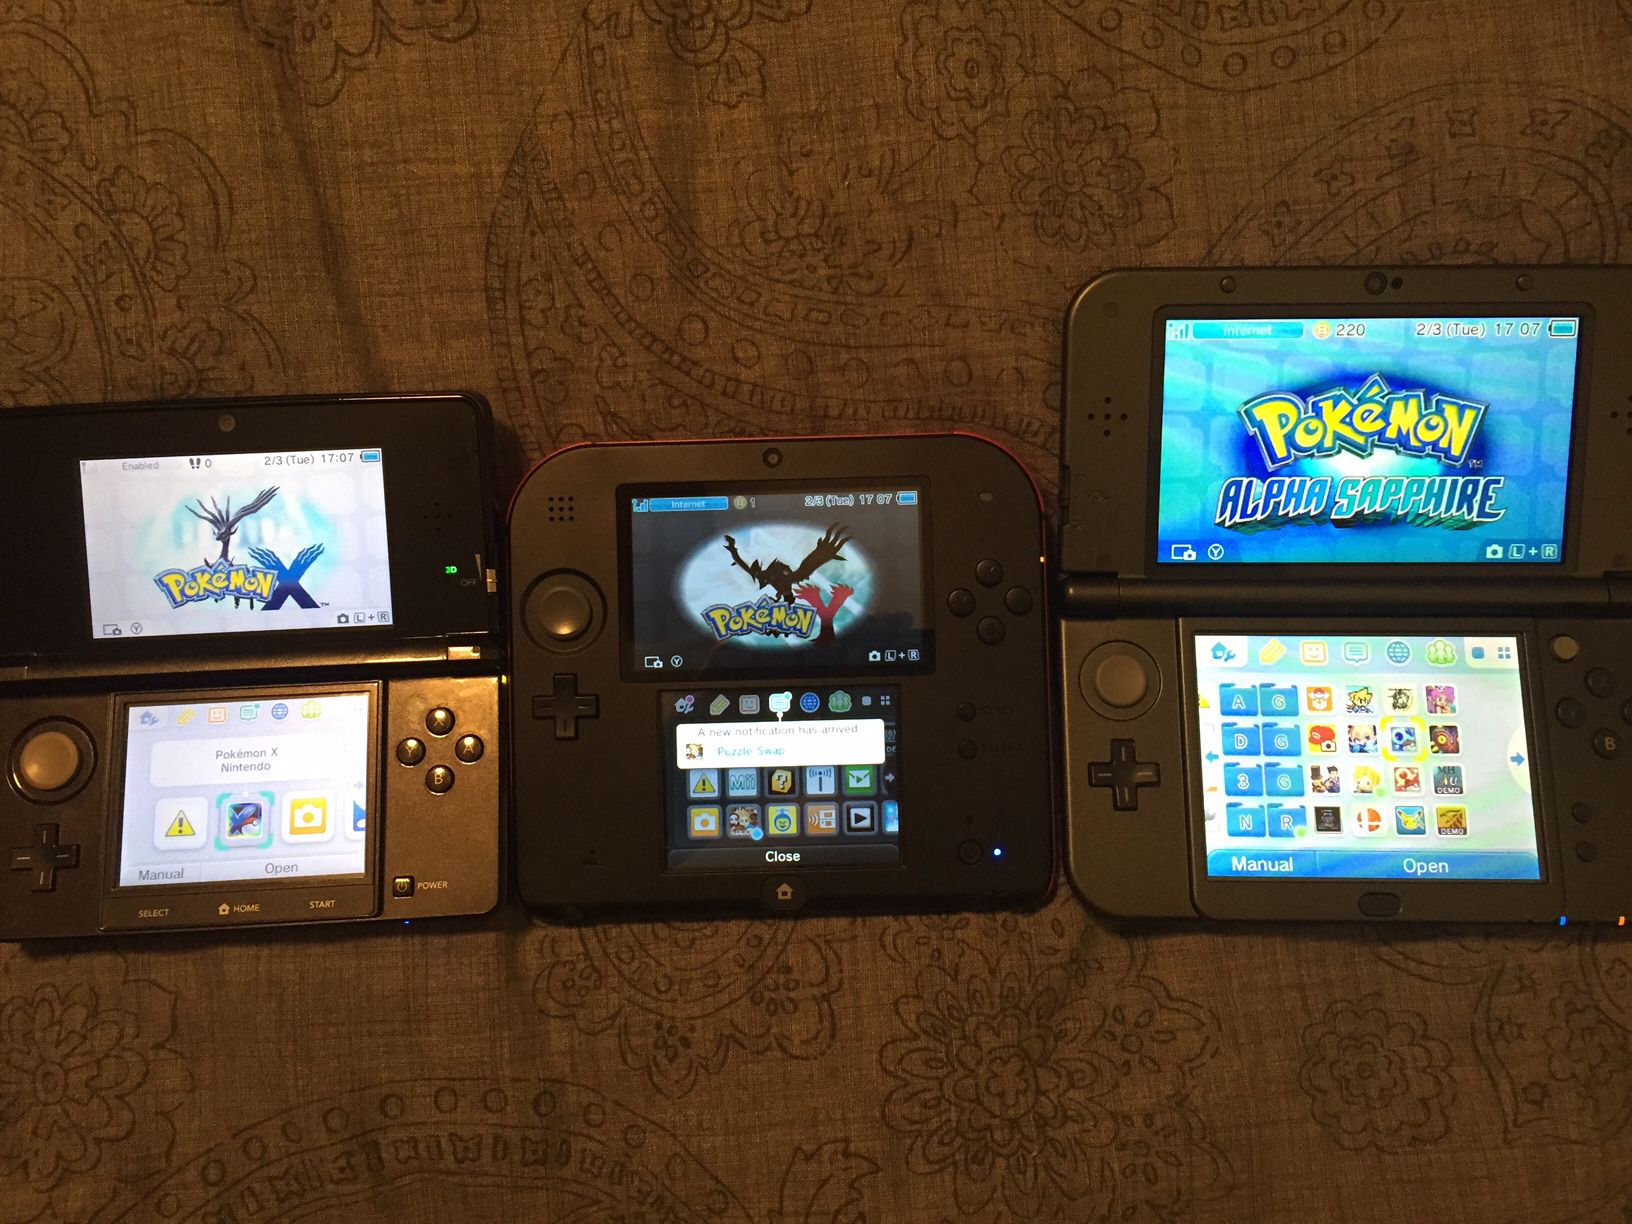 Review Nintendo S New 3ds Xl Is Far Better Than The Original Model But Do You Need To Upgrade